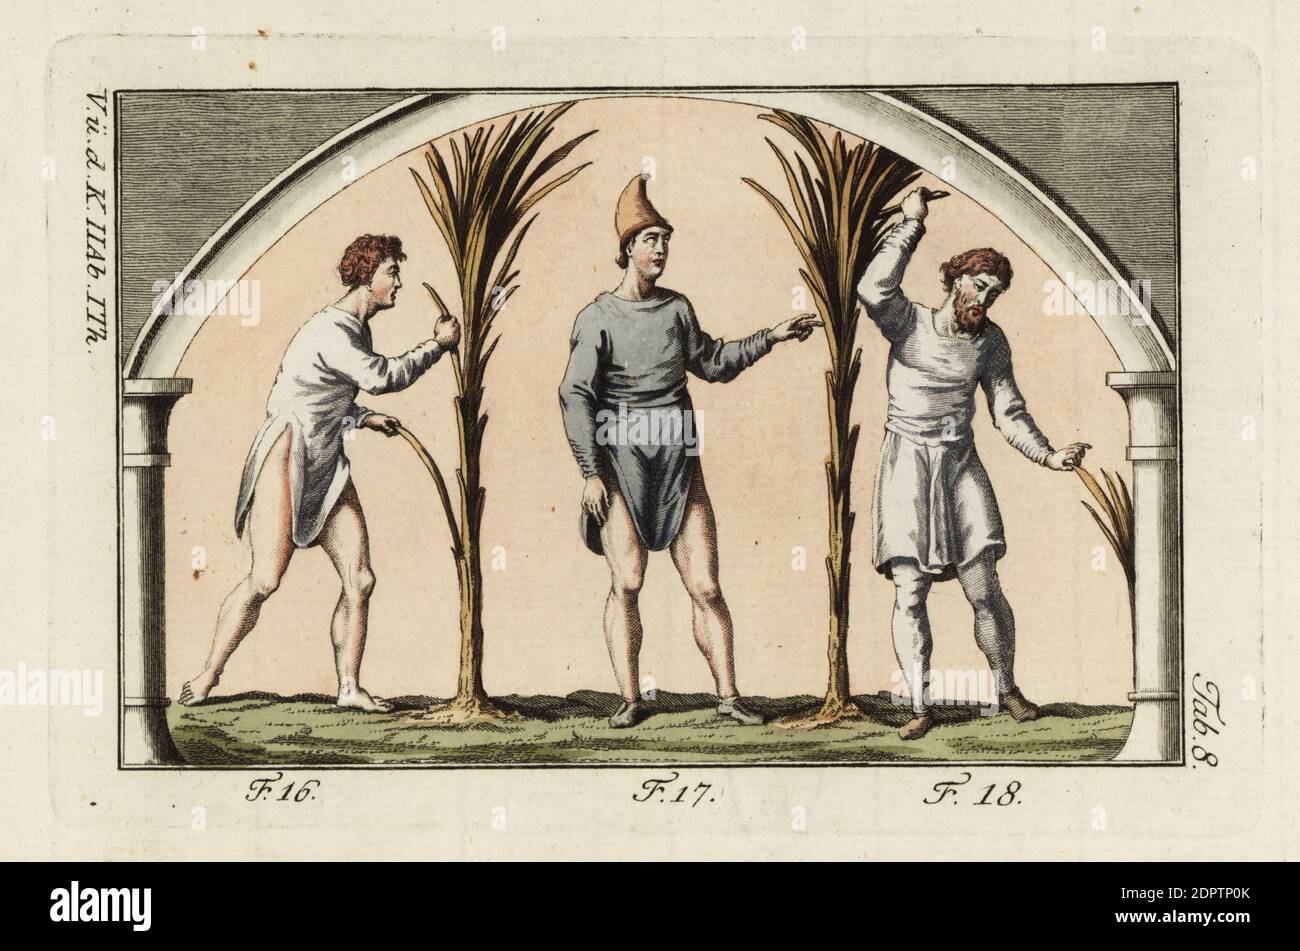 Anglo-Saxon labourer and farmers. Laborer (or slave) in simple open tunica without a belt (16), a farmer (or free man) in tunica and Phrygian hat (17) and a high-rank farmer in knee-length tunica and leggings (18). Handcolored copperplate engraving from Robert von Spalart's Historical Picture of the Costumes of the Principal People of Antiquity and Middle Ages, Vienna, 1796. Stock Photo